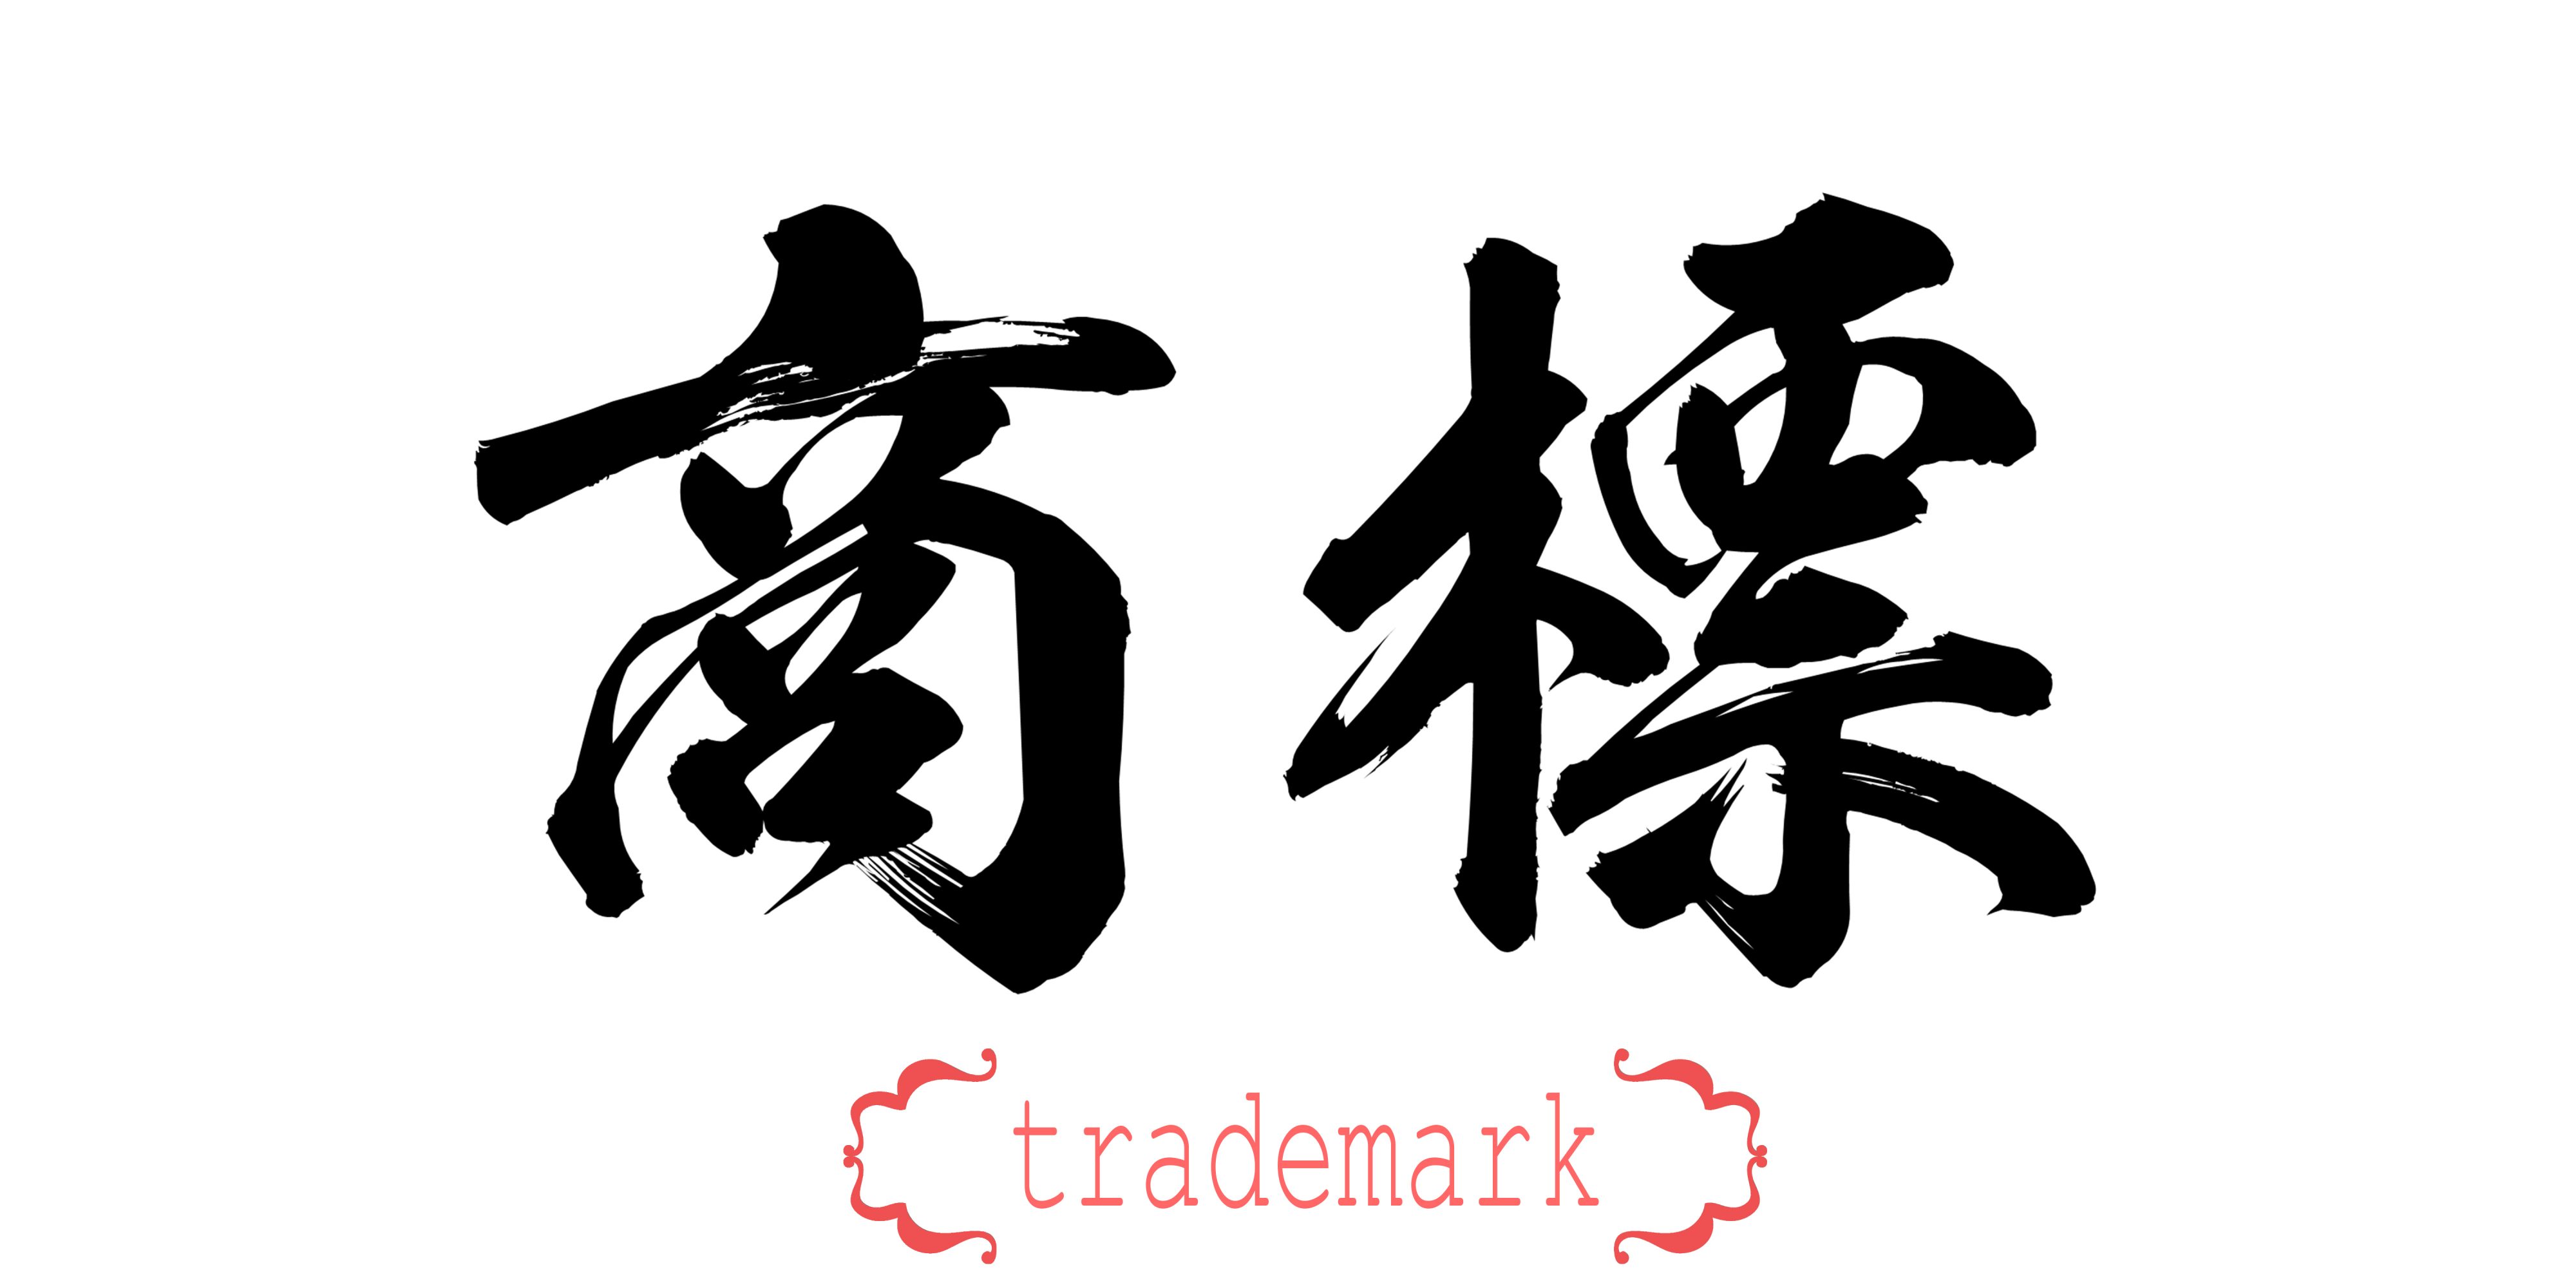 Trademark in Chinese